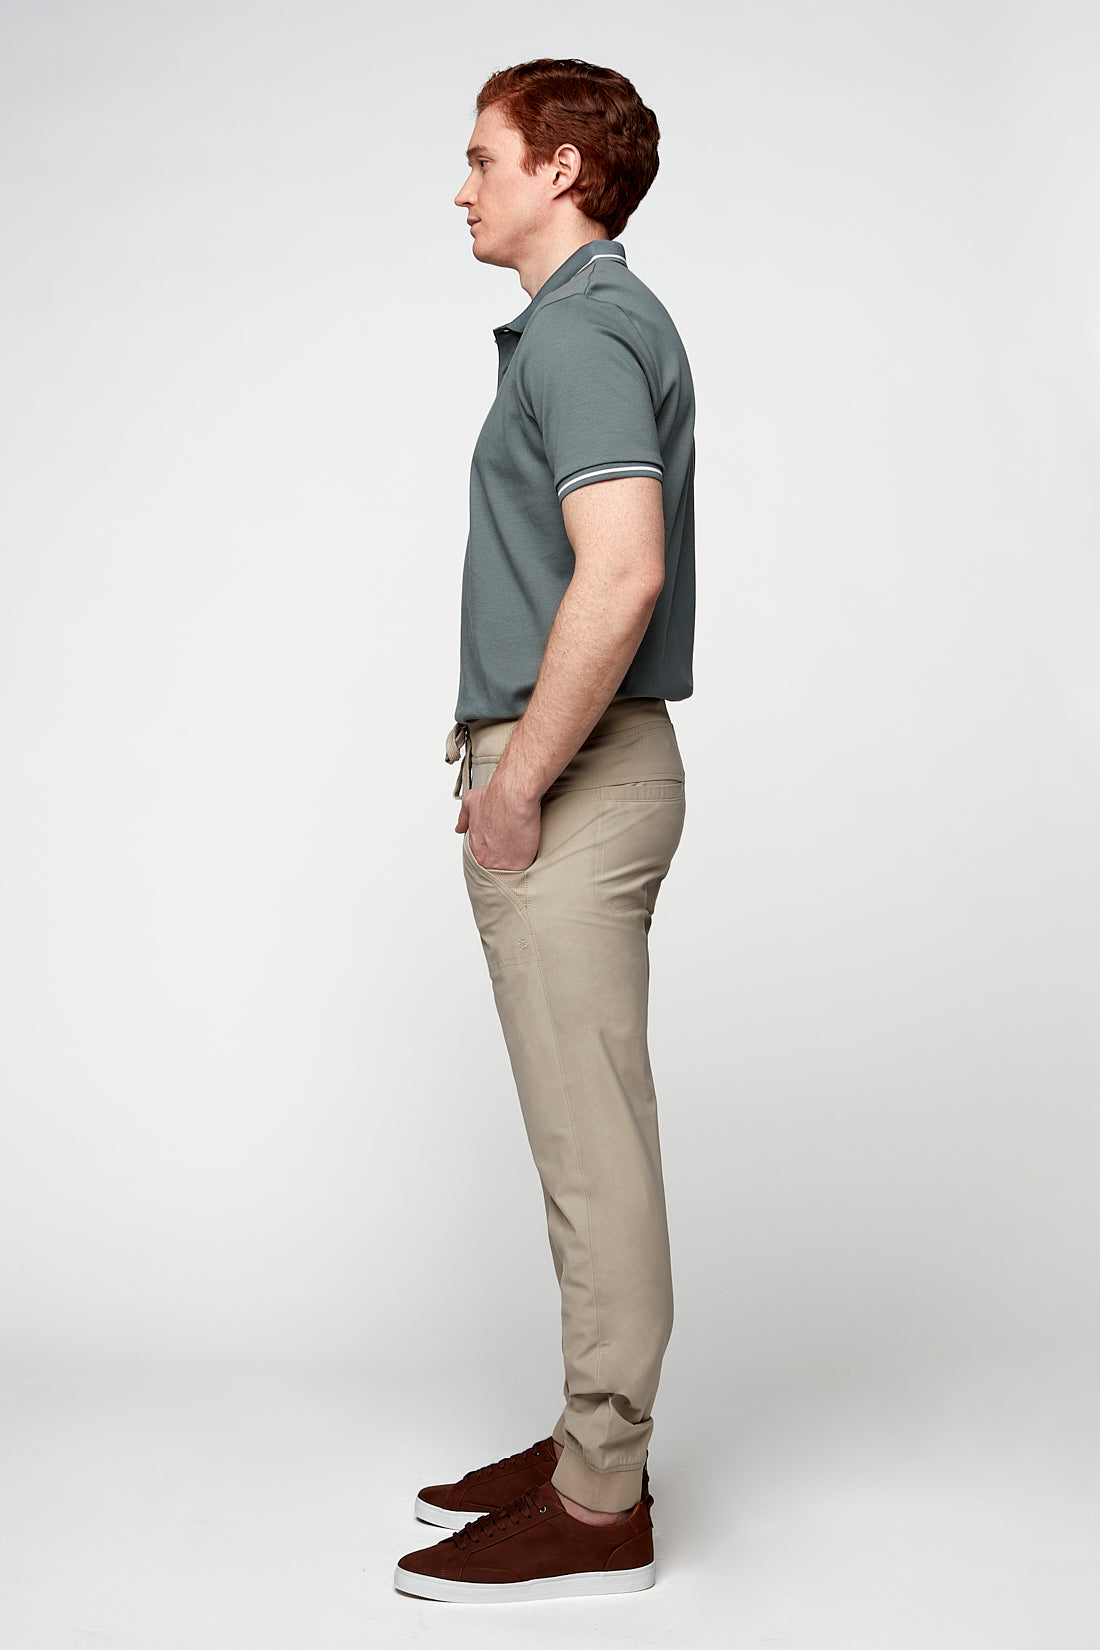 AXEL - Pull-On Jogger with Elasticized Waist & Cuffs - Sage - DENIM SOCIETY™